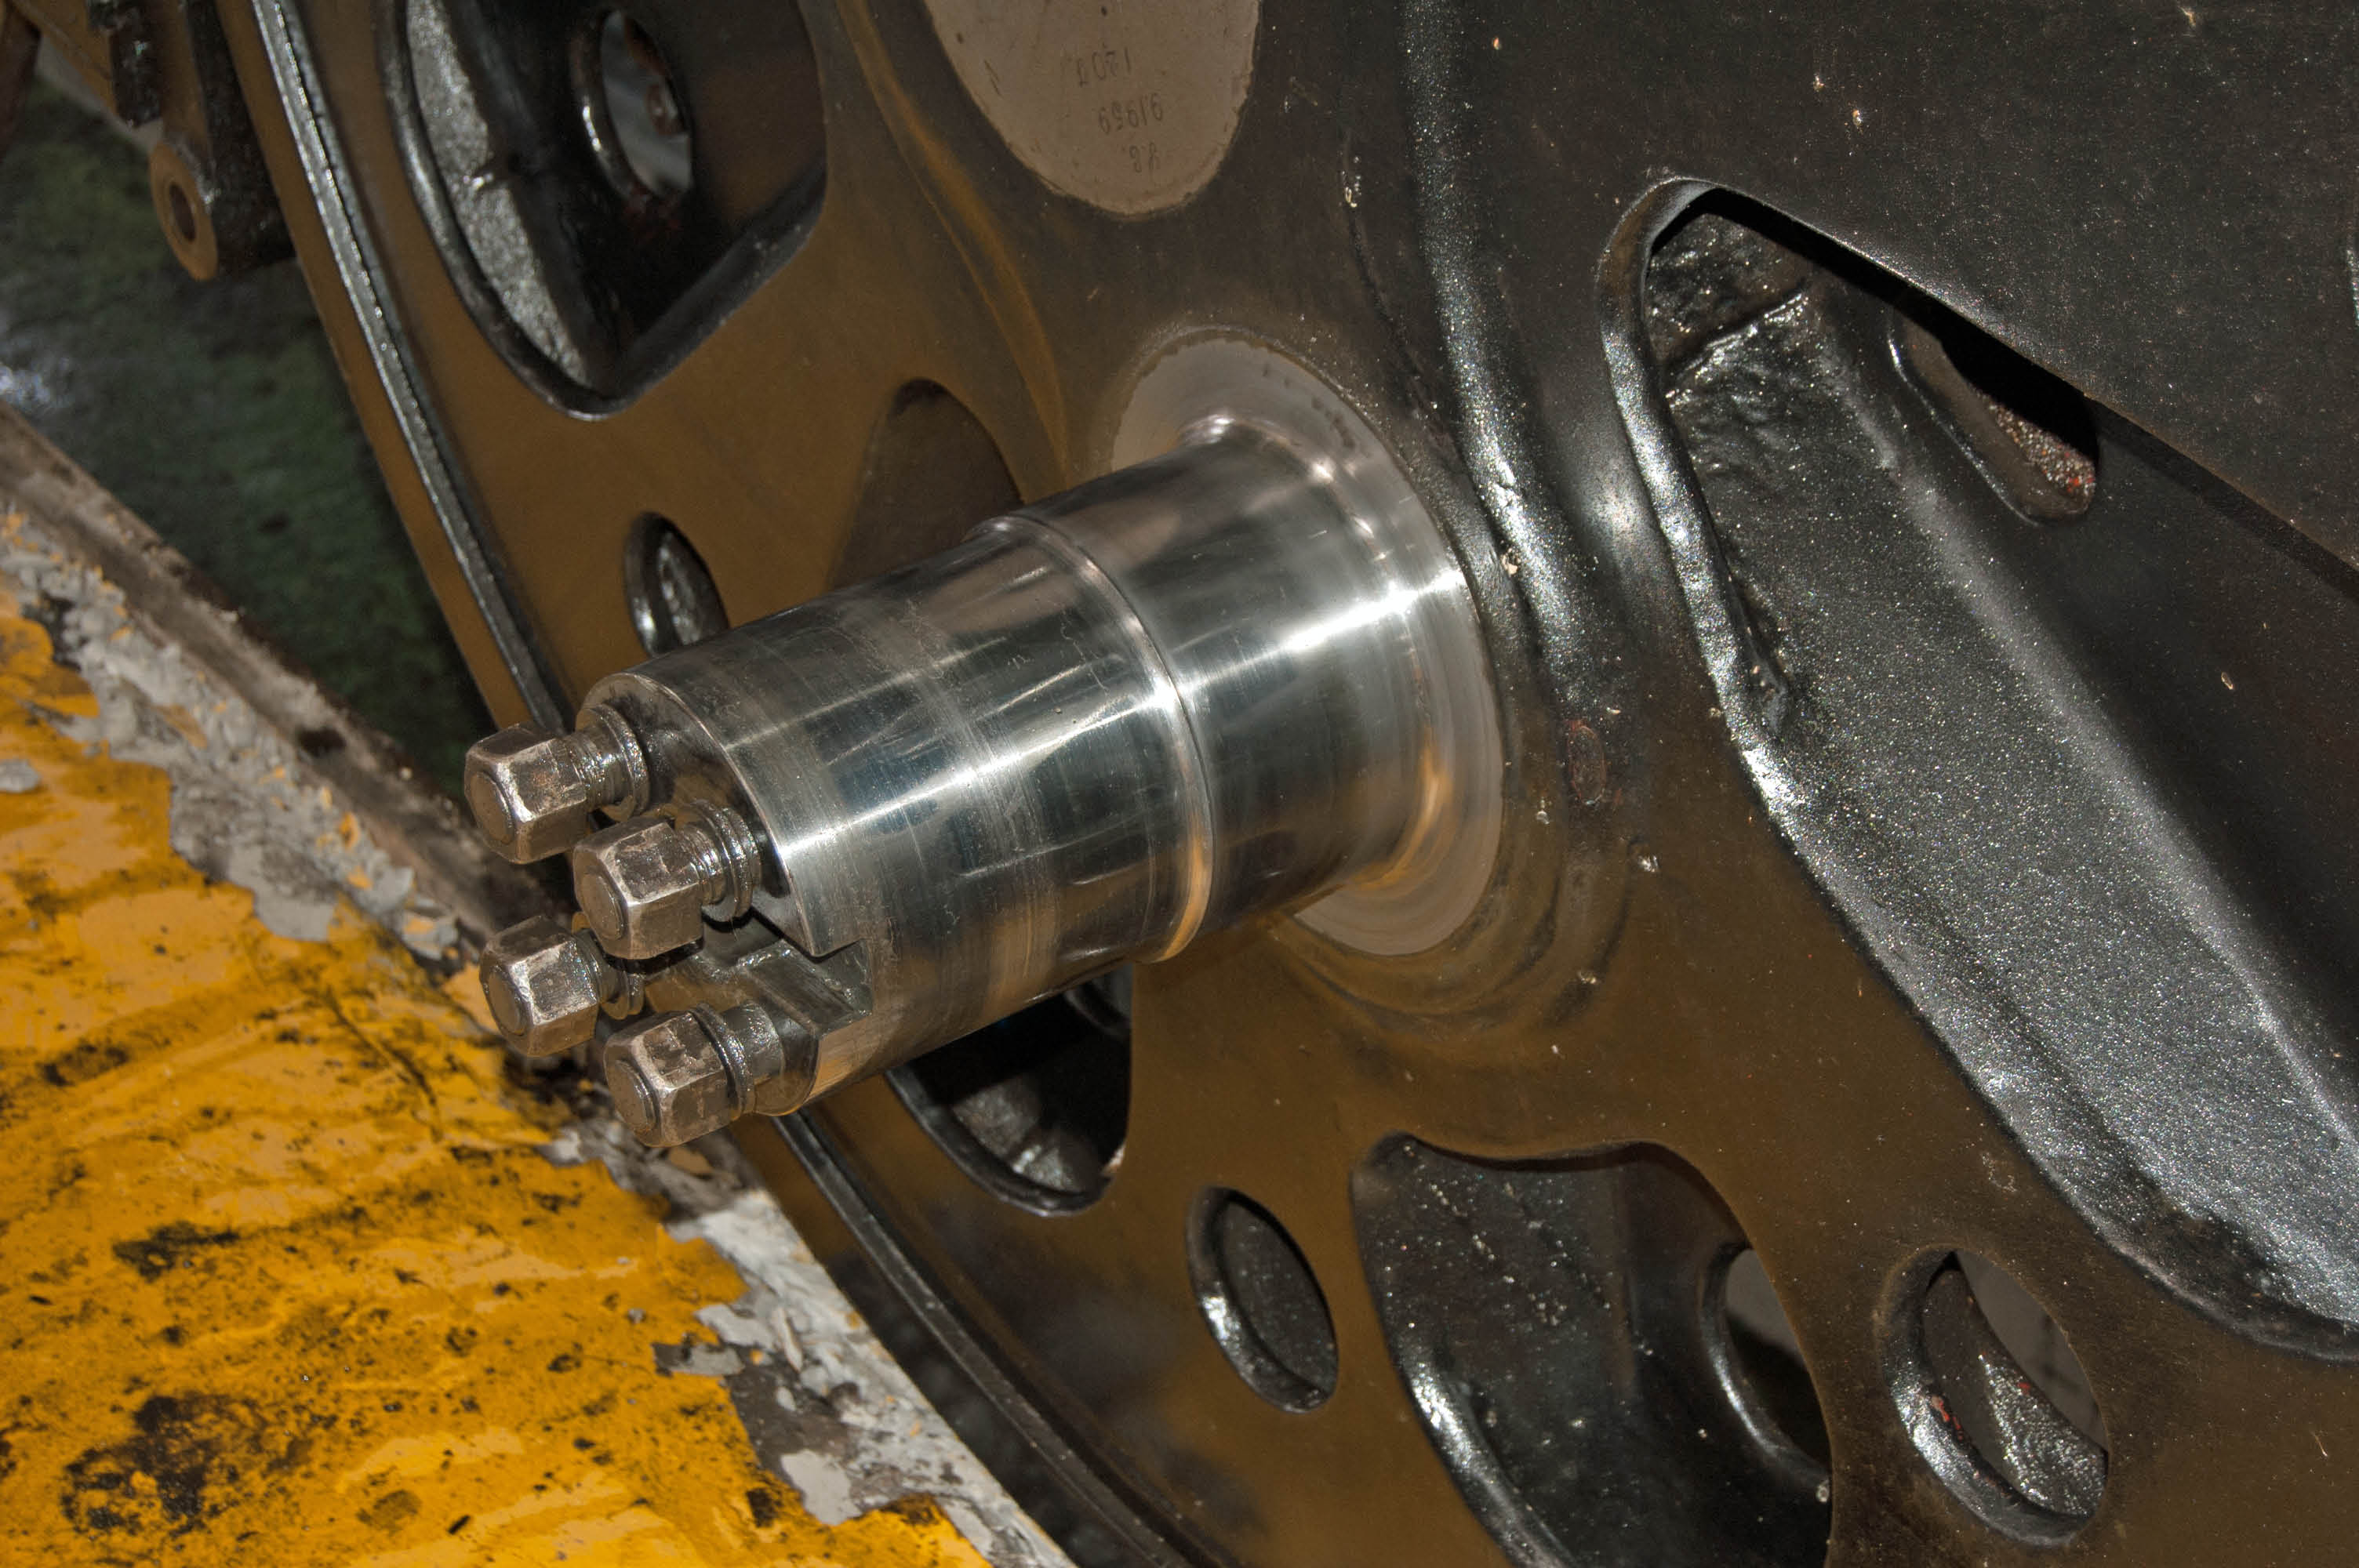 One of the crank pins